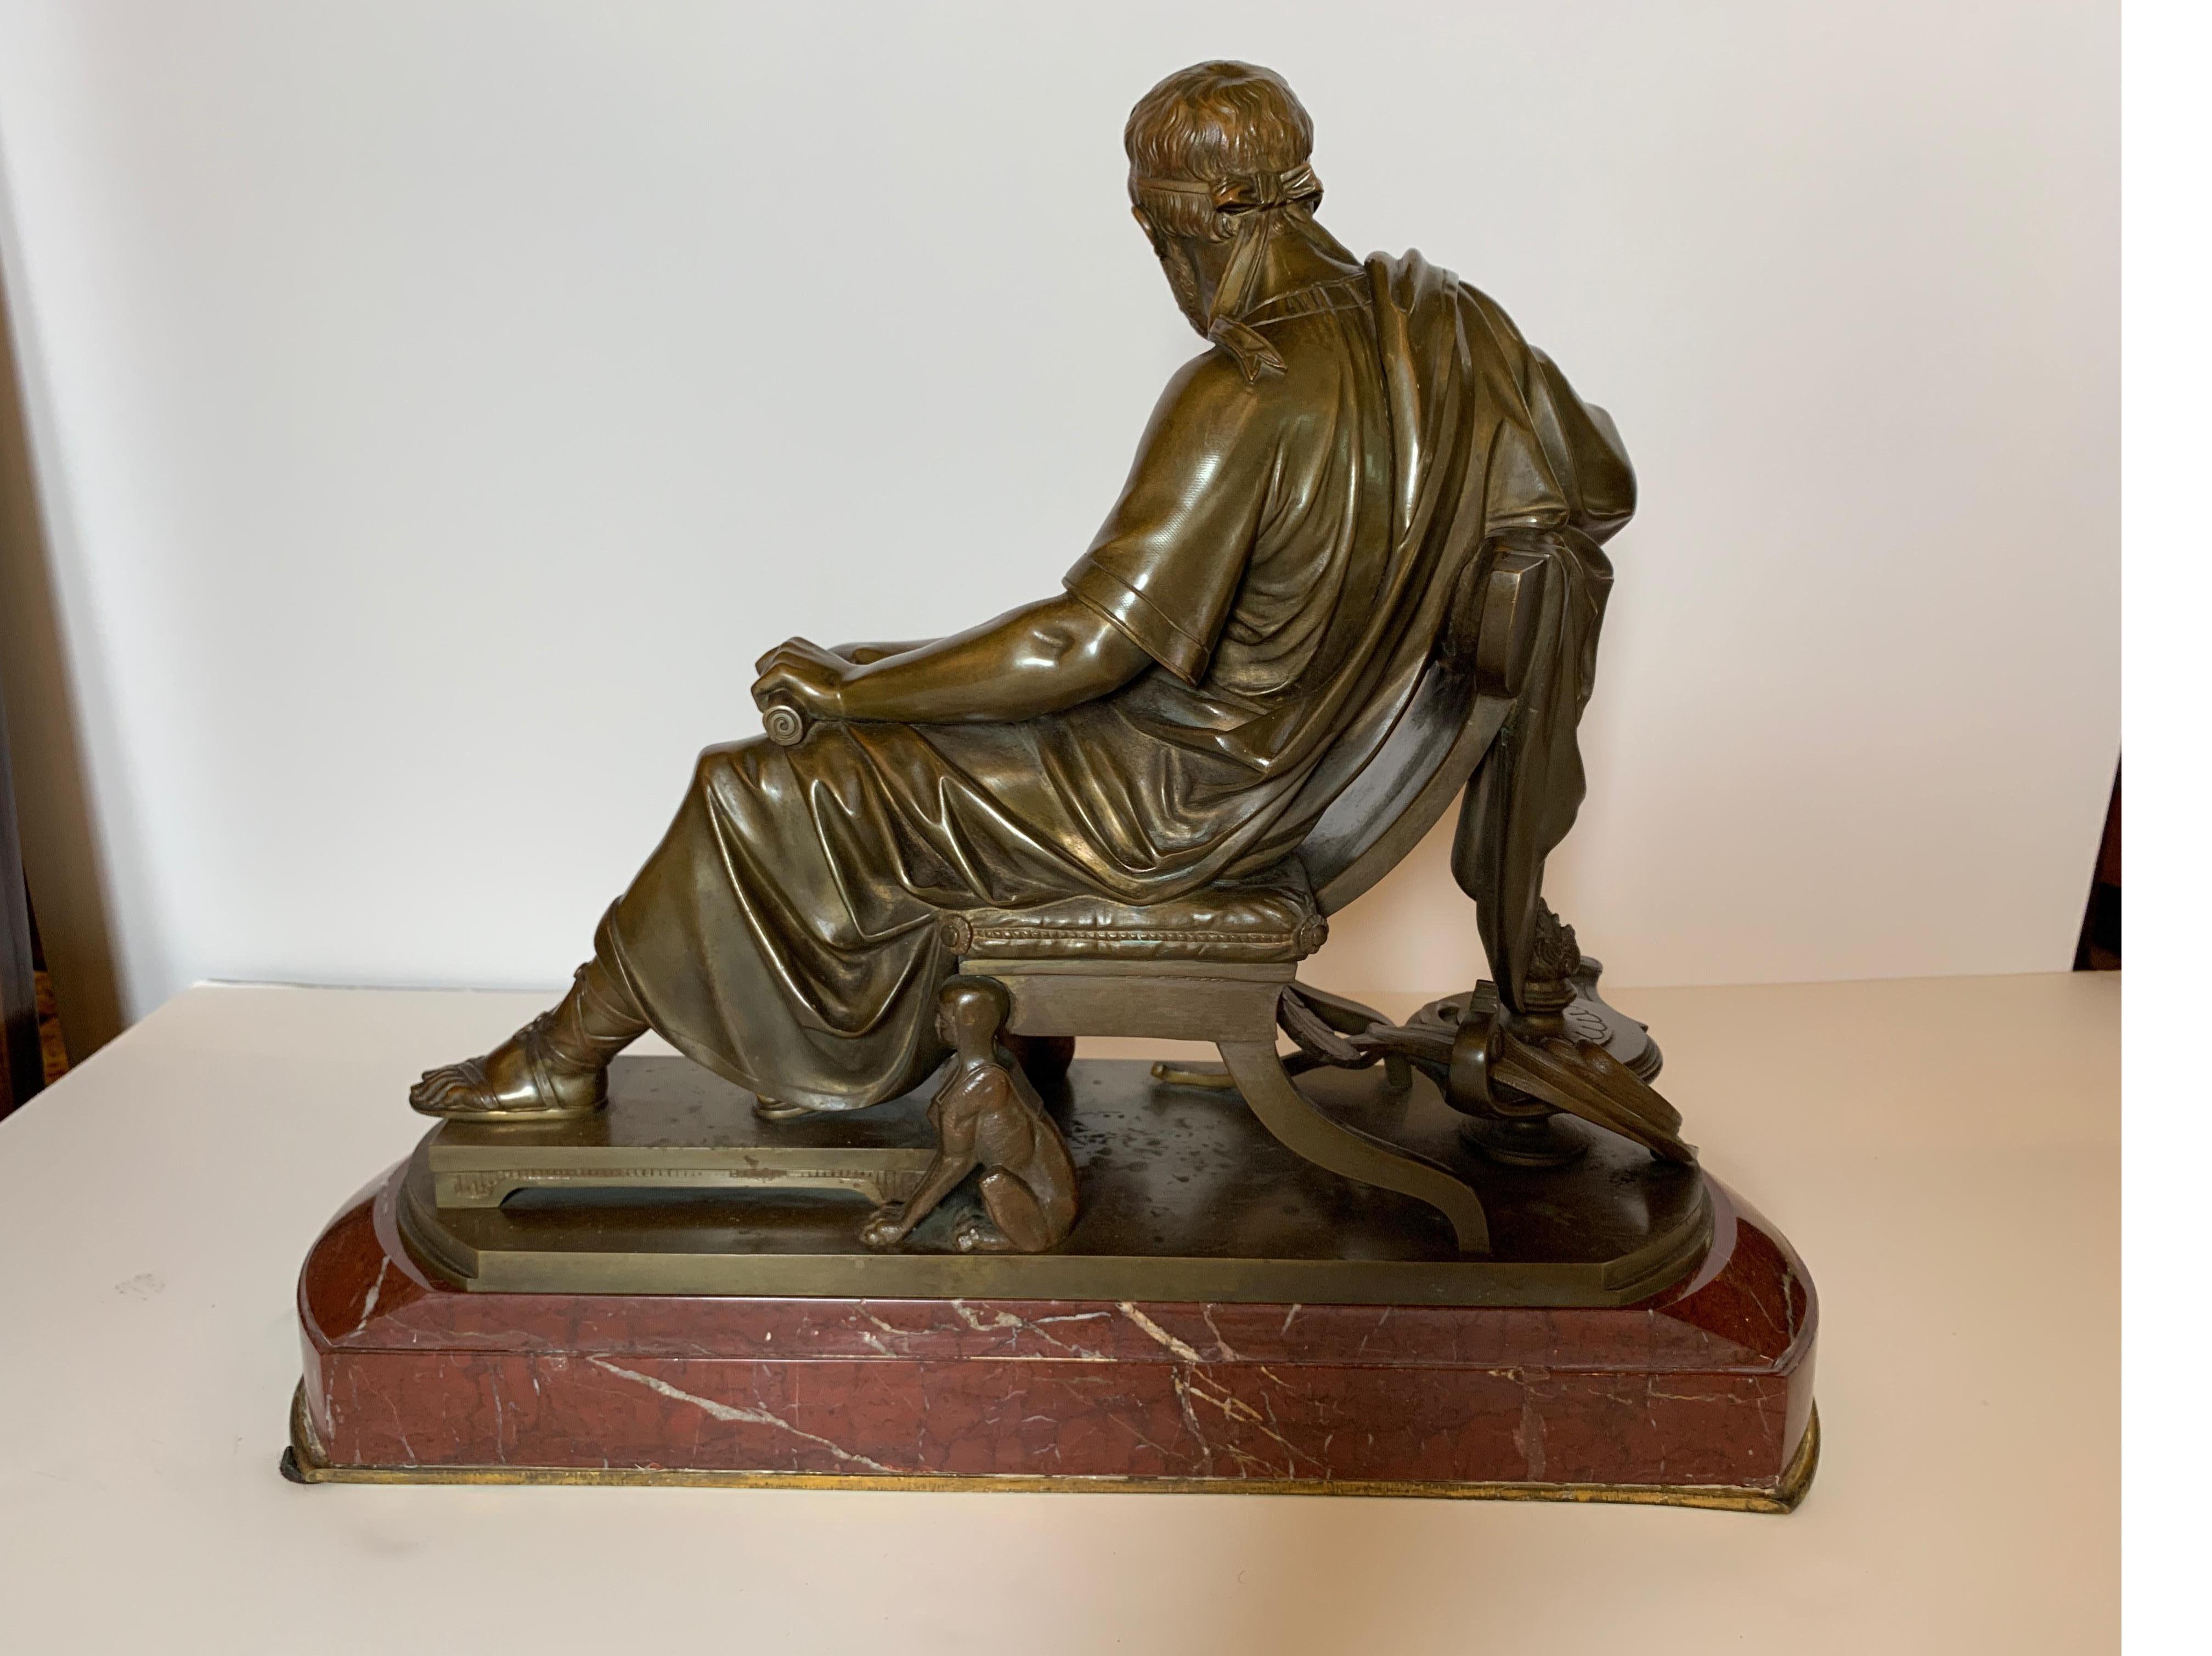 Neoclassical Revival Mid-19th Century Bronze Figure of Tacitus on Marble Base